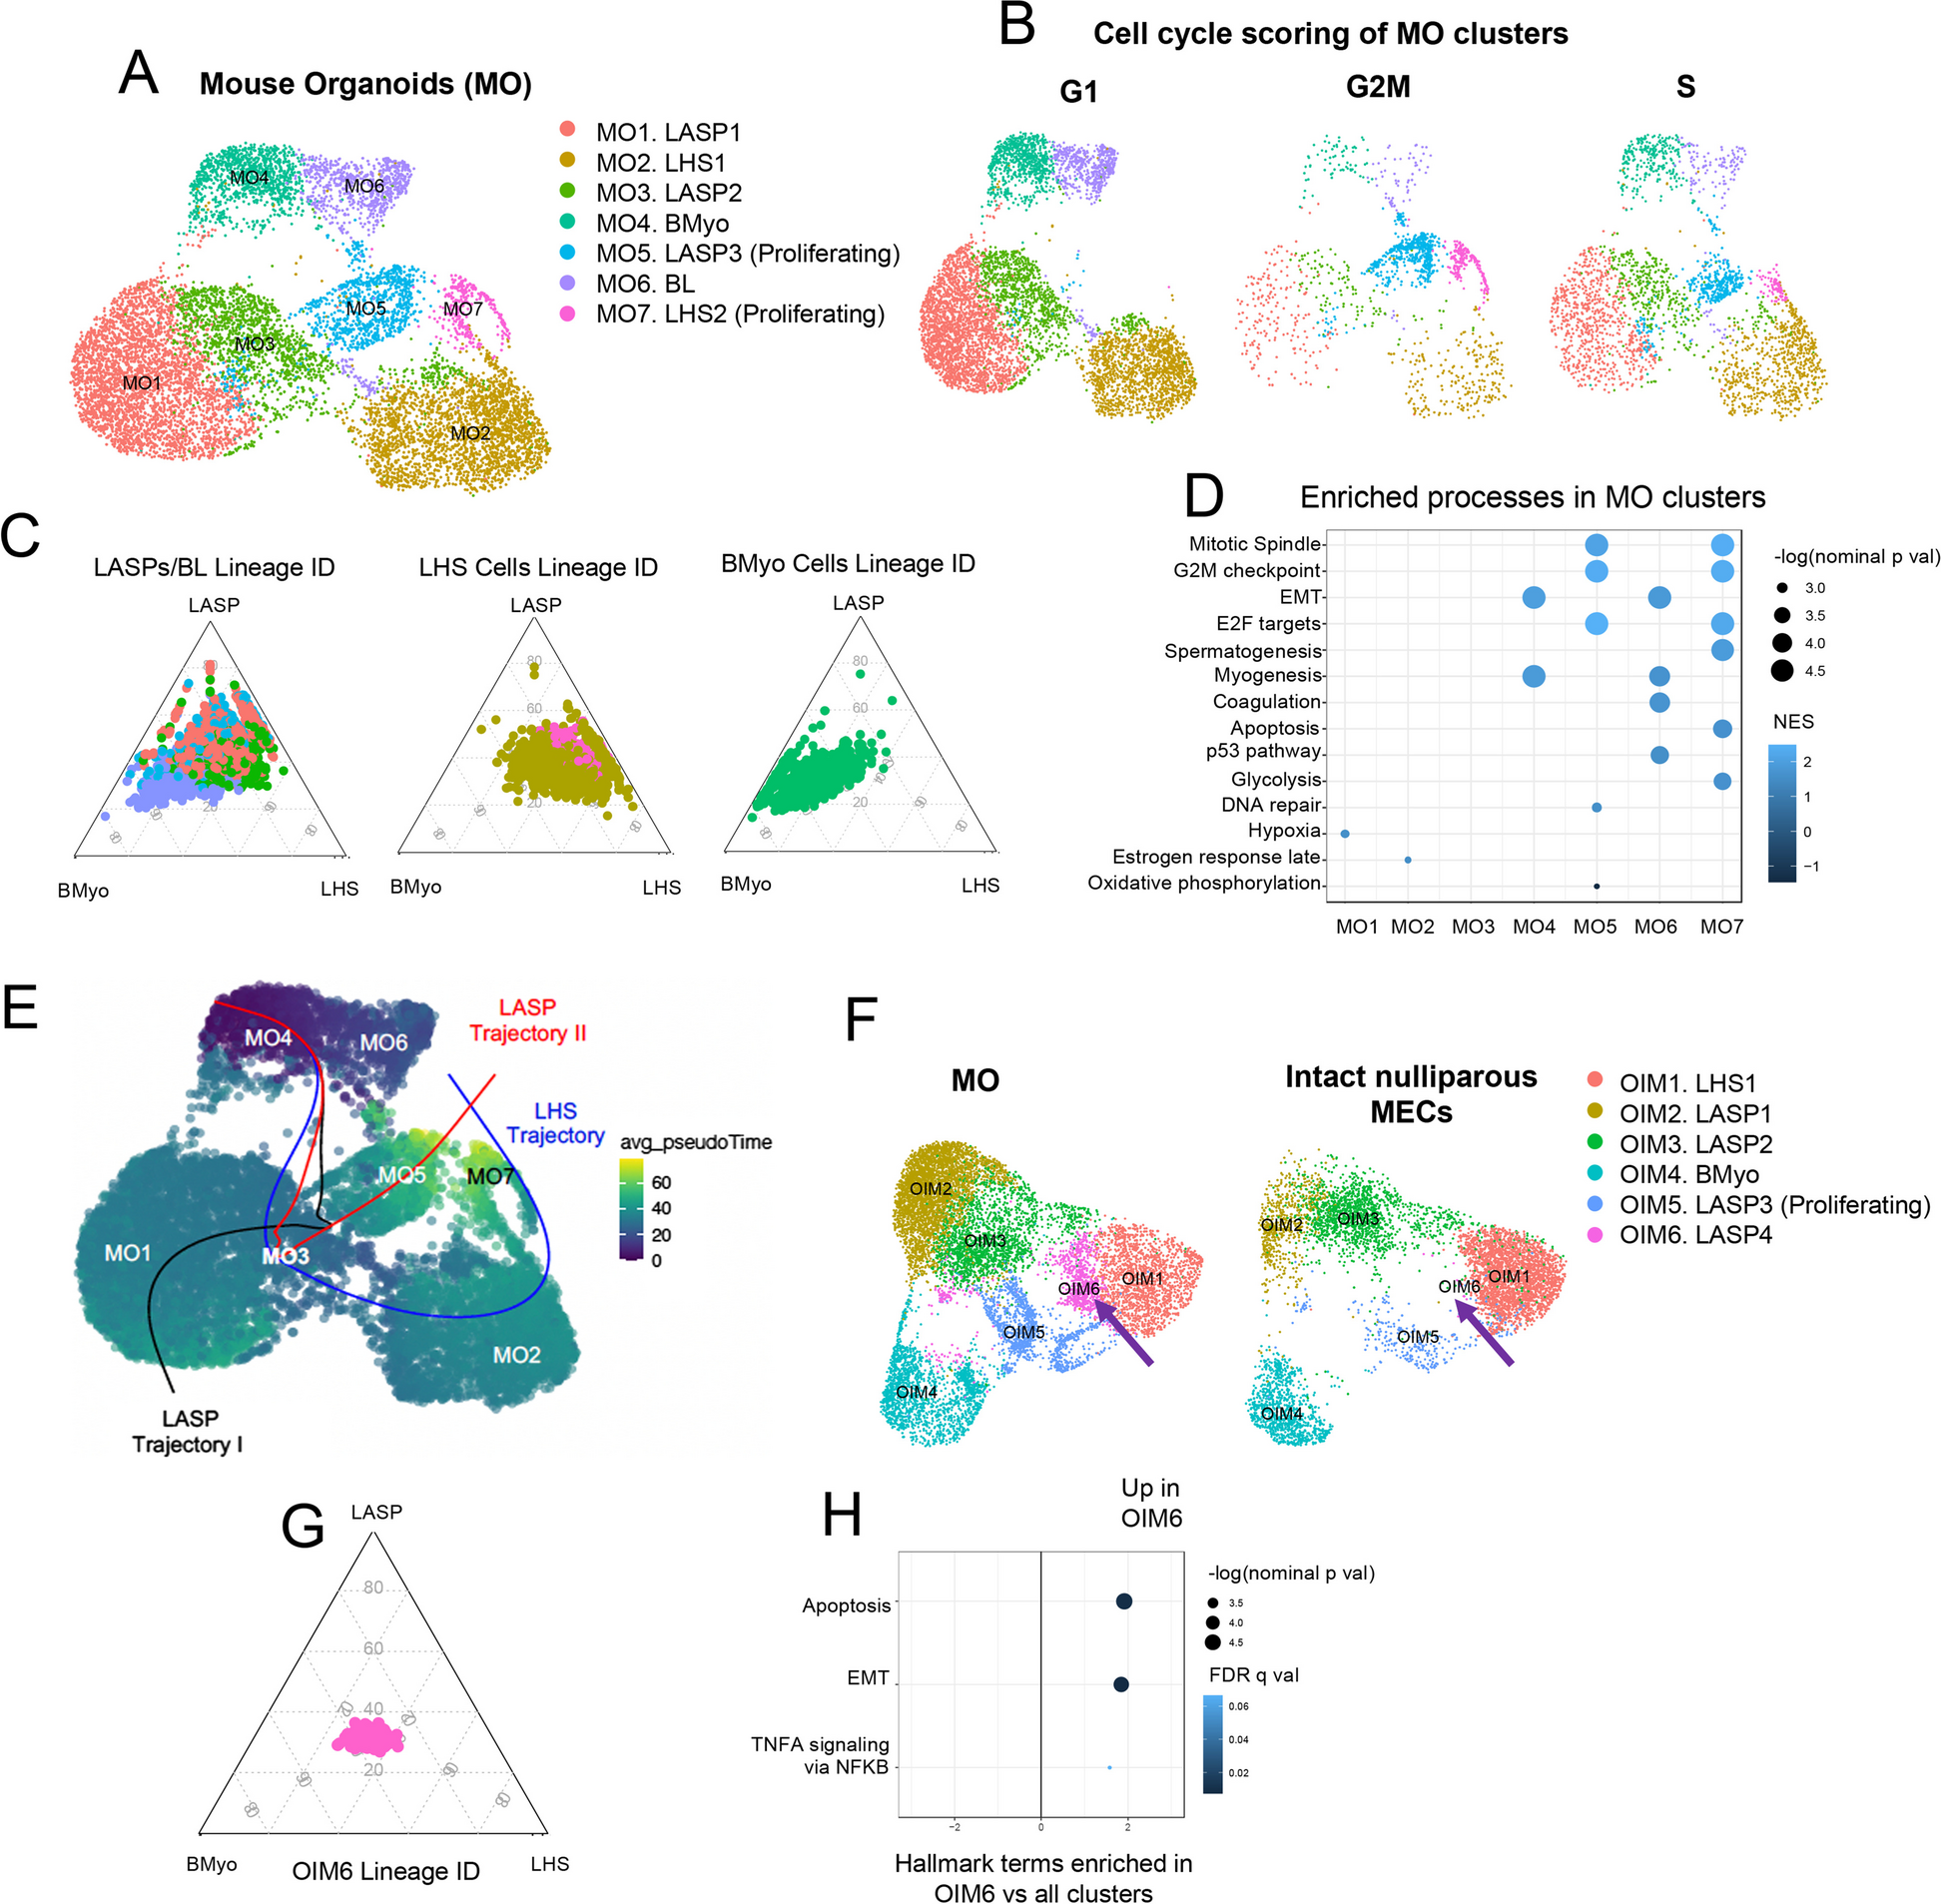 Single-Cell Transcription Mapping of Murine and Human Mammary Organoids Responses to Female Hormones